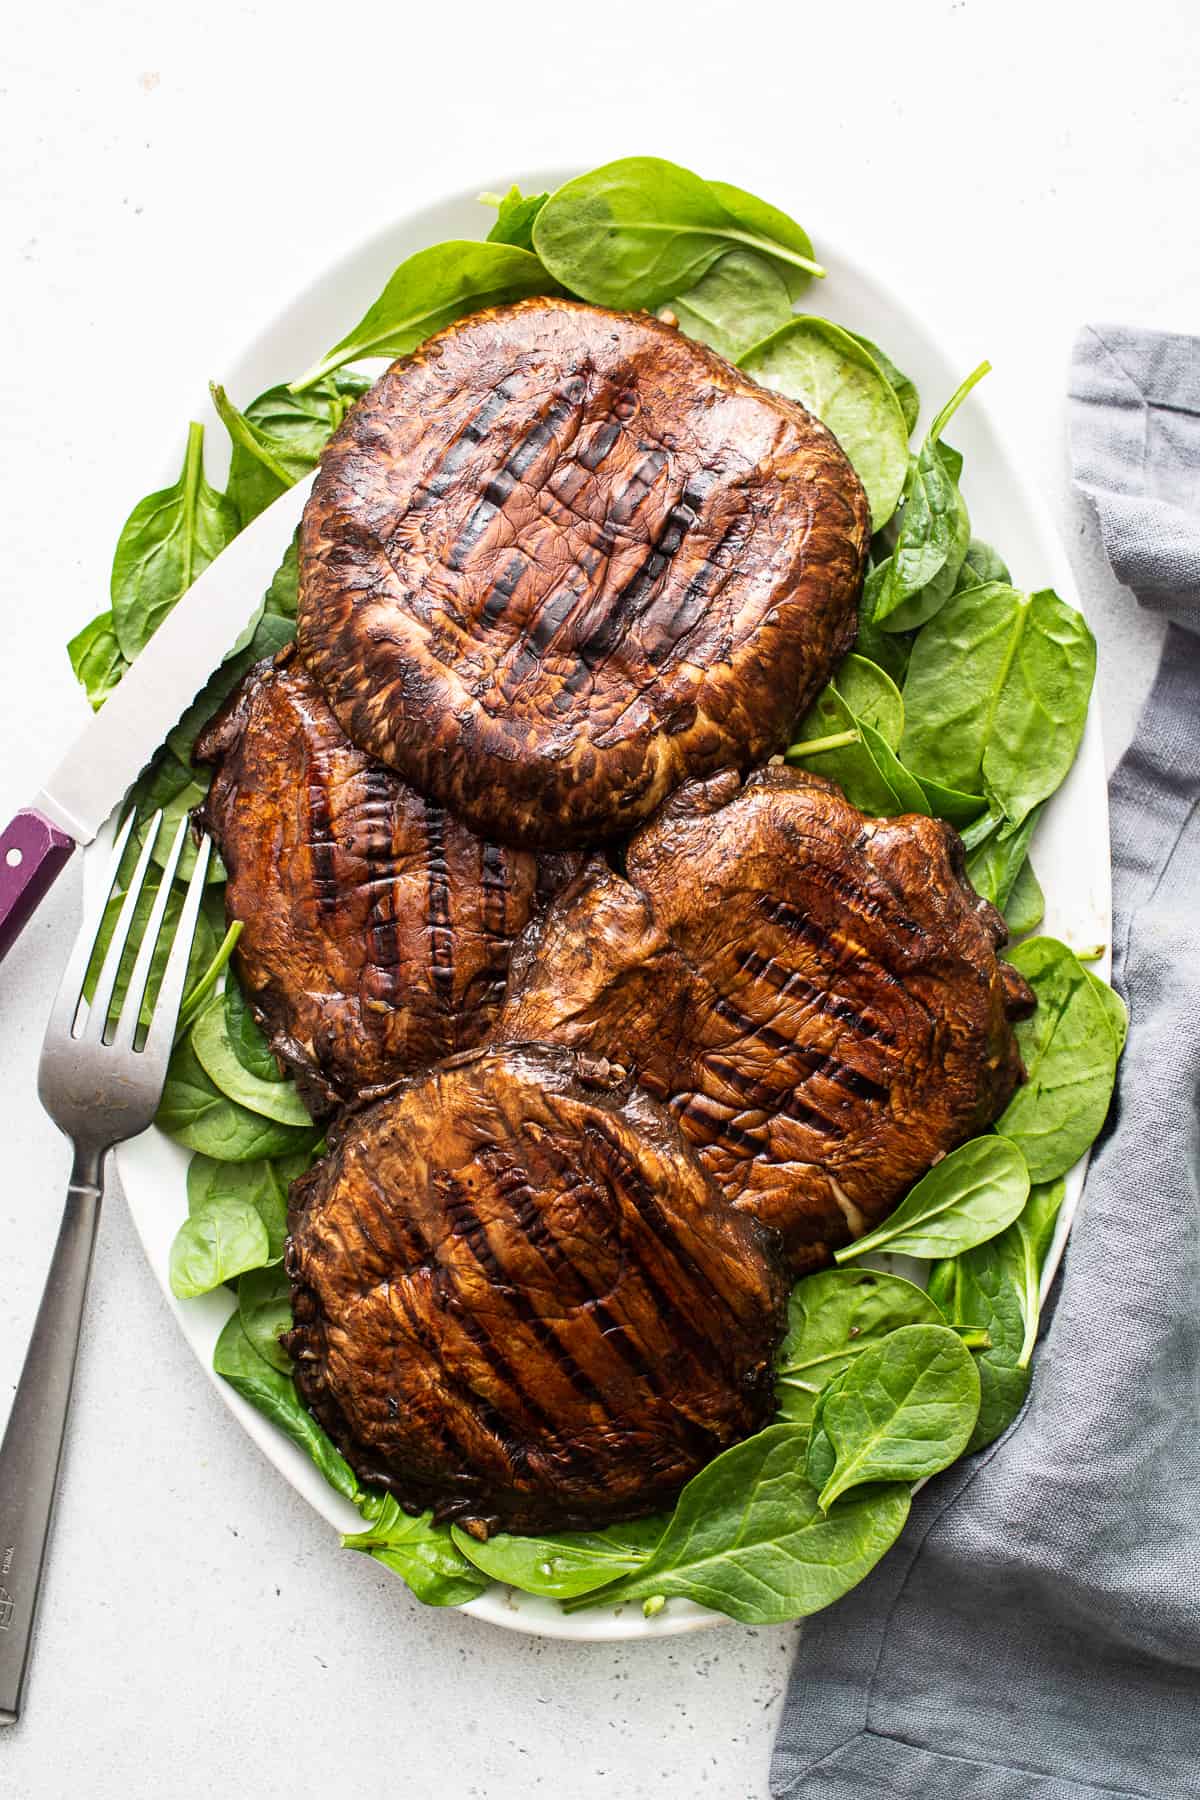 Grilled Portobello Mushrooms - Fit Foodie Finds